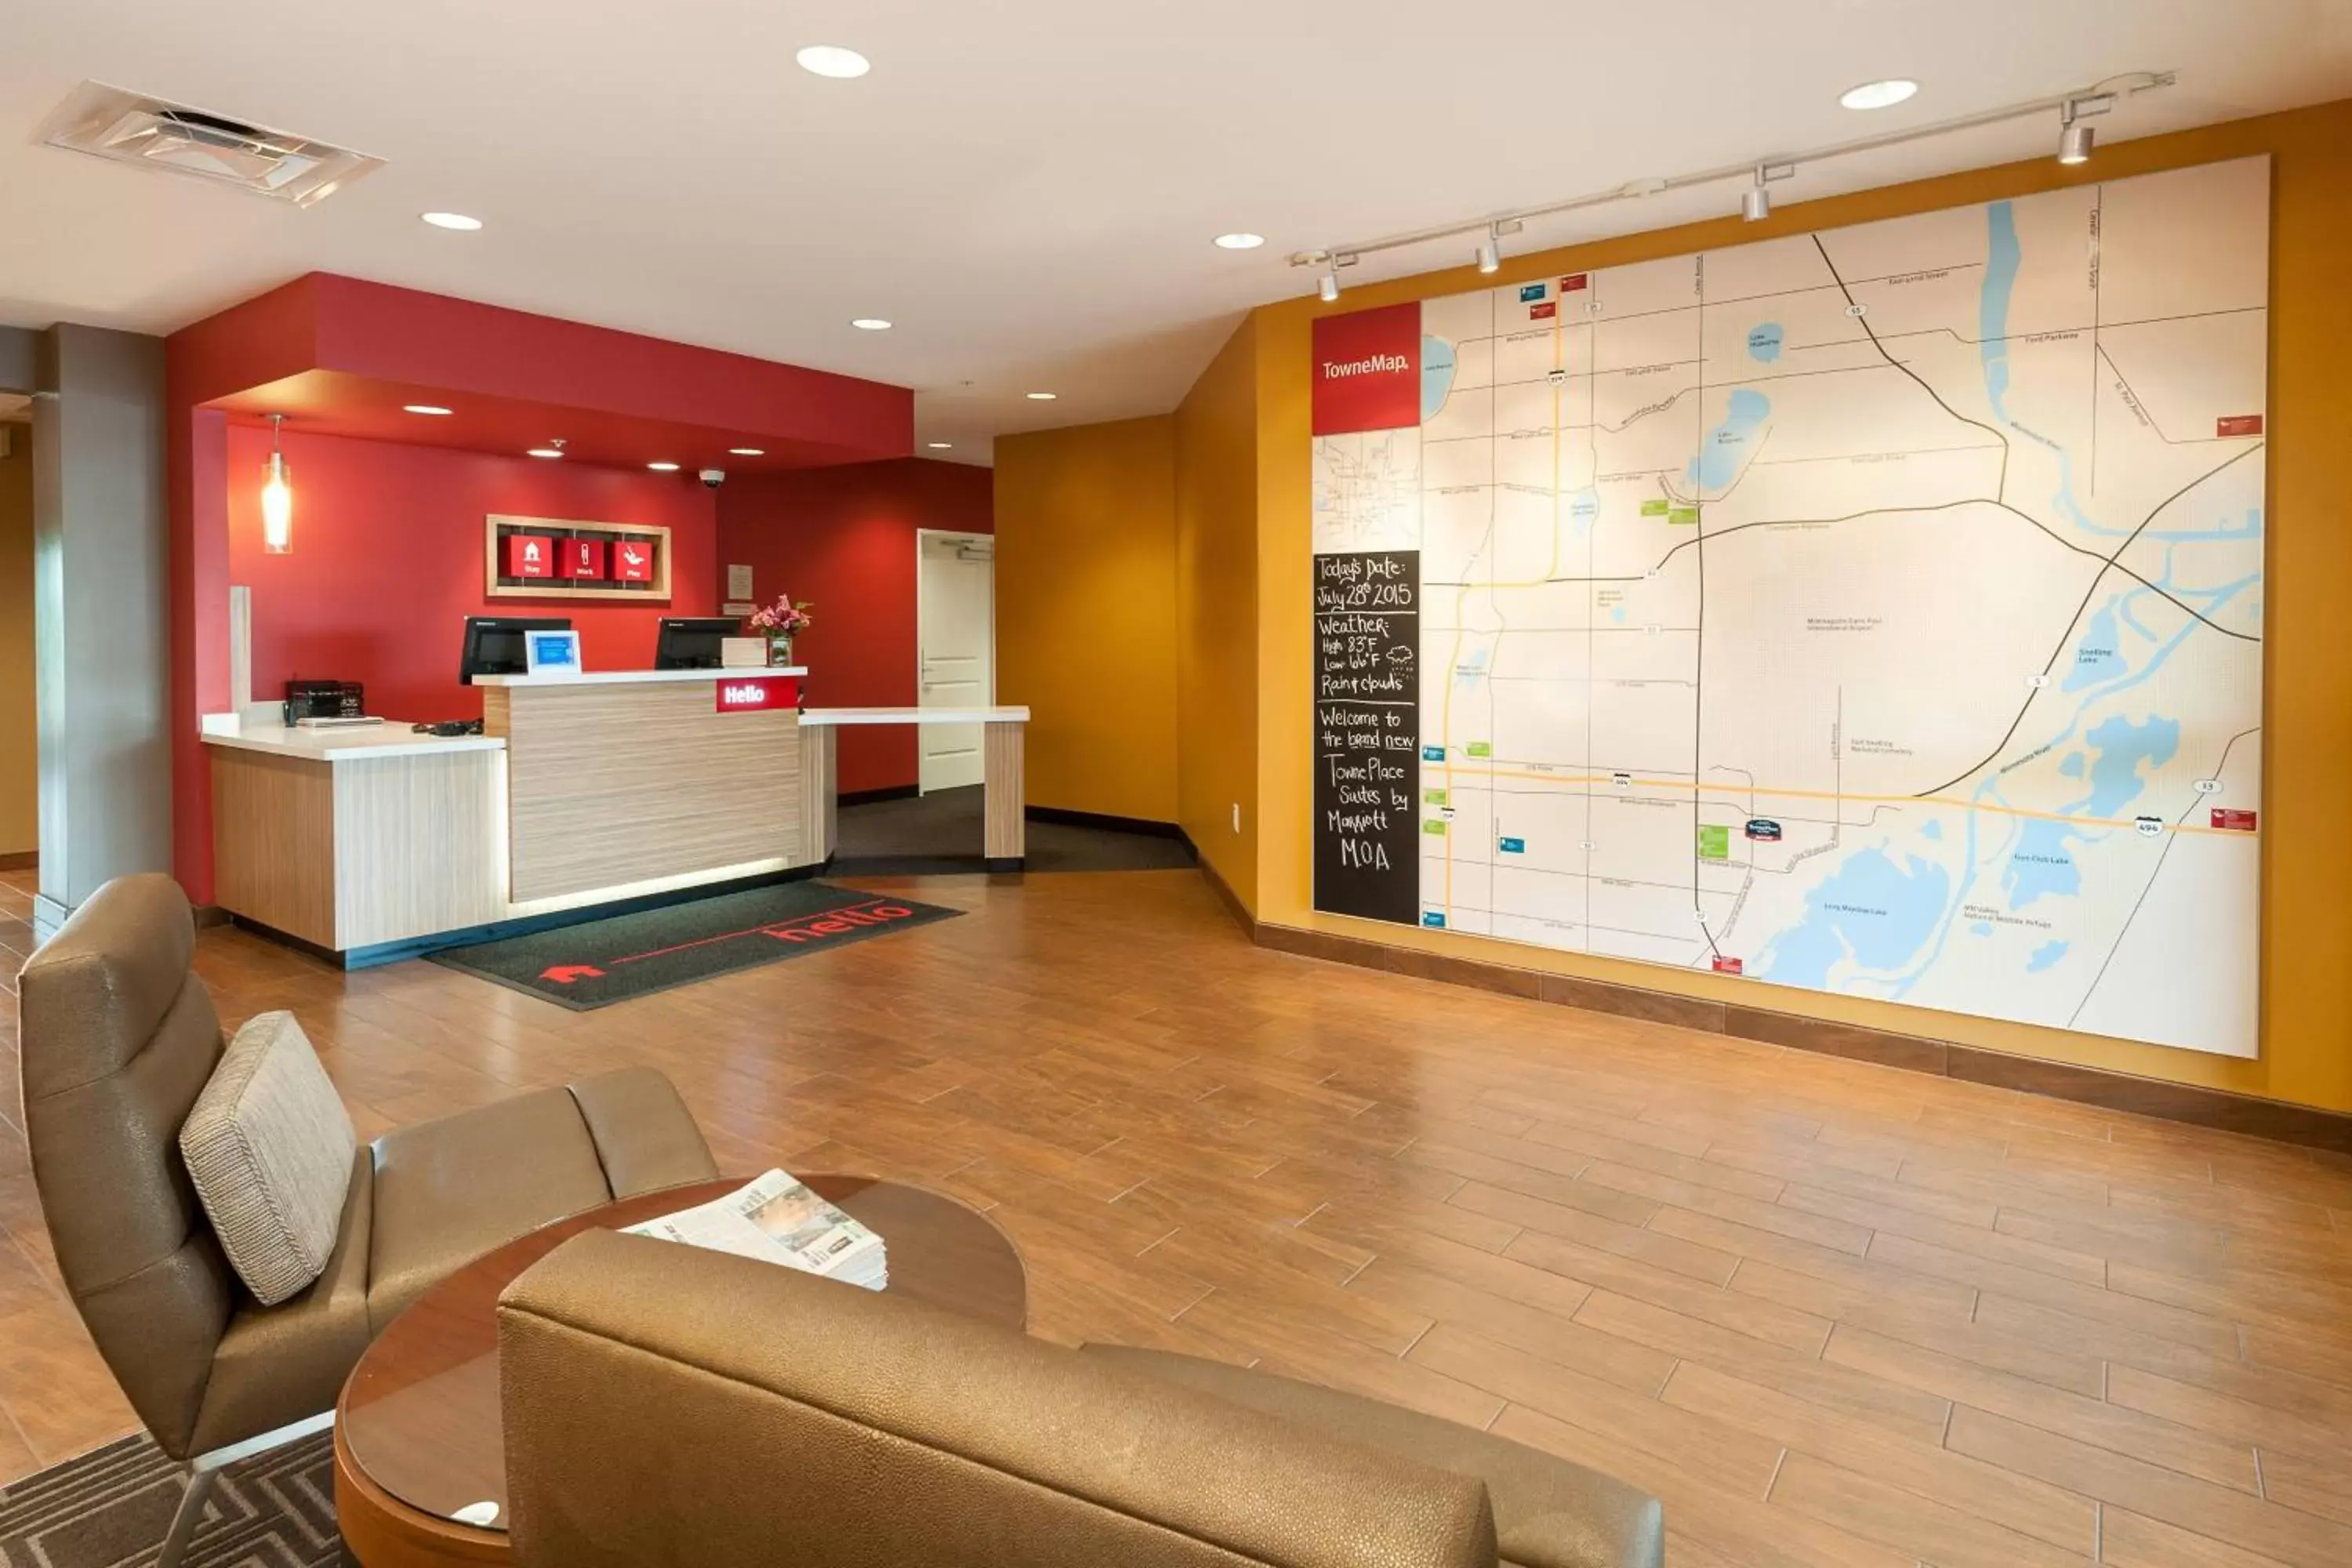 Location in TownePlace Suites by Marriott Minneapolis near Mall of America